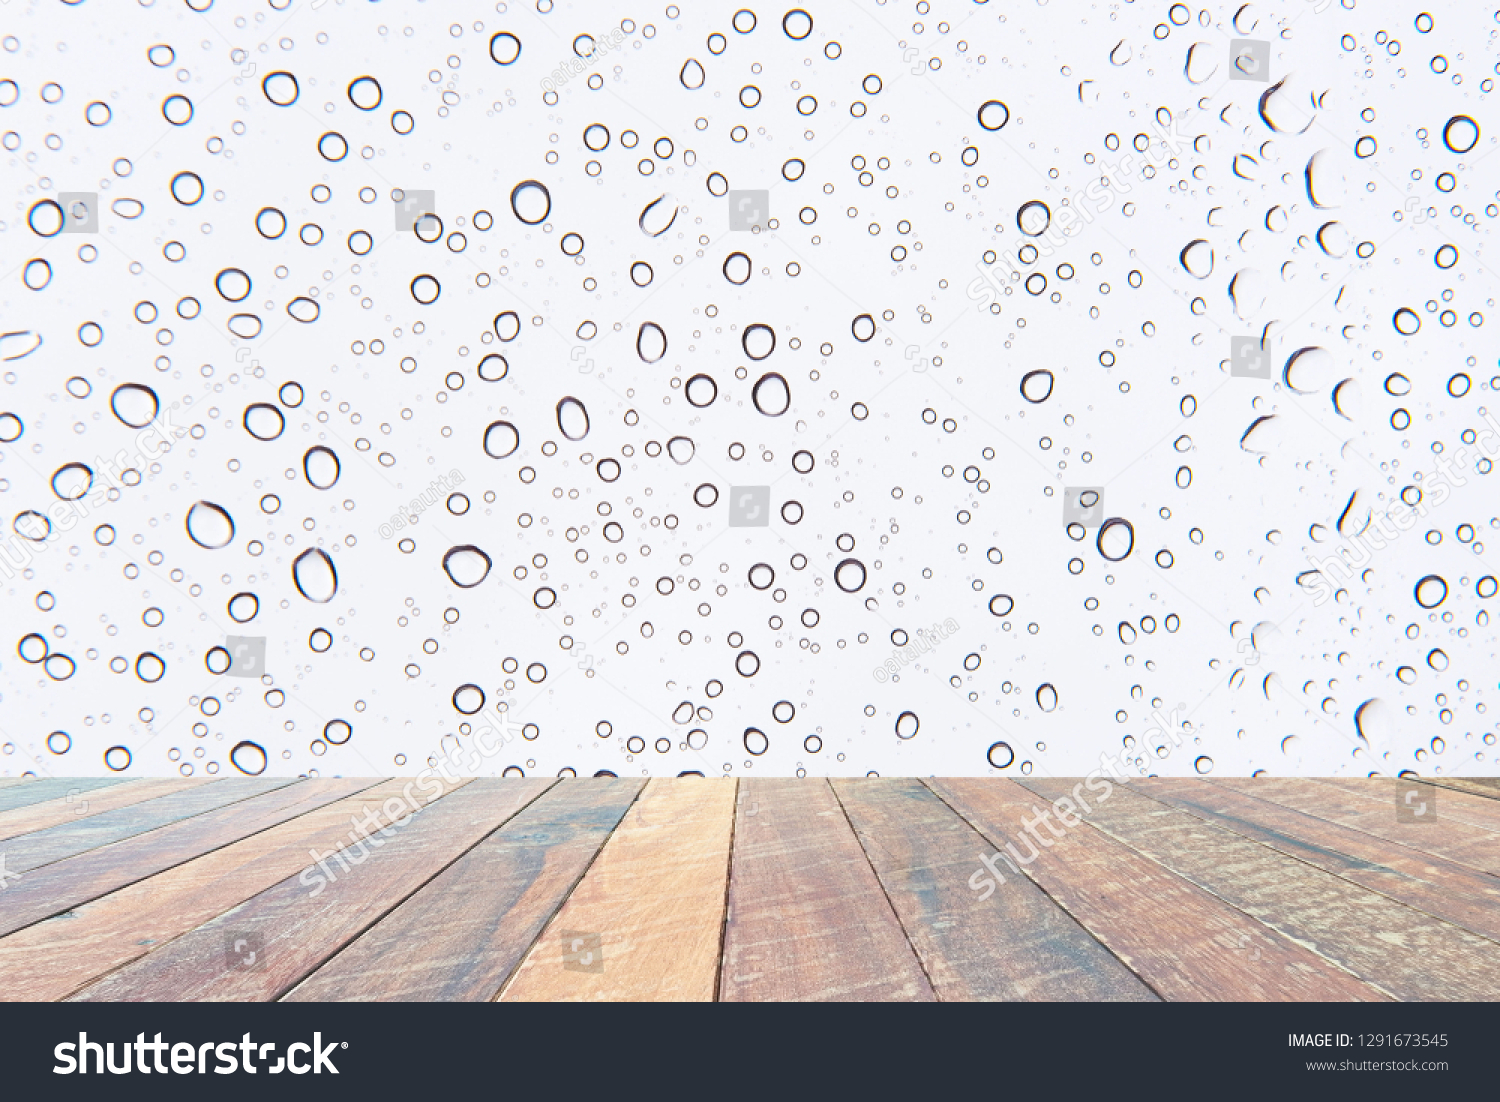 Water drops , Rain droplets on white background and empty wood desk .Blank space for text and images. #1291673545